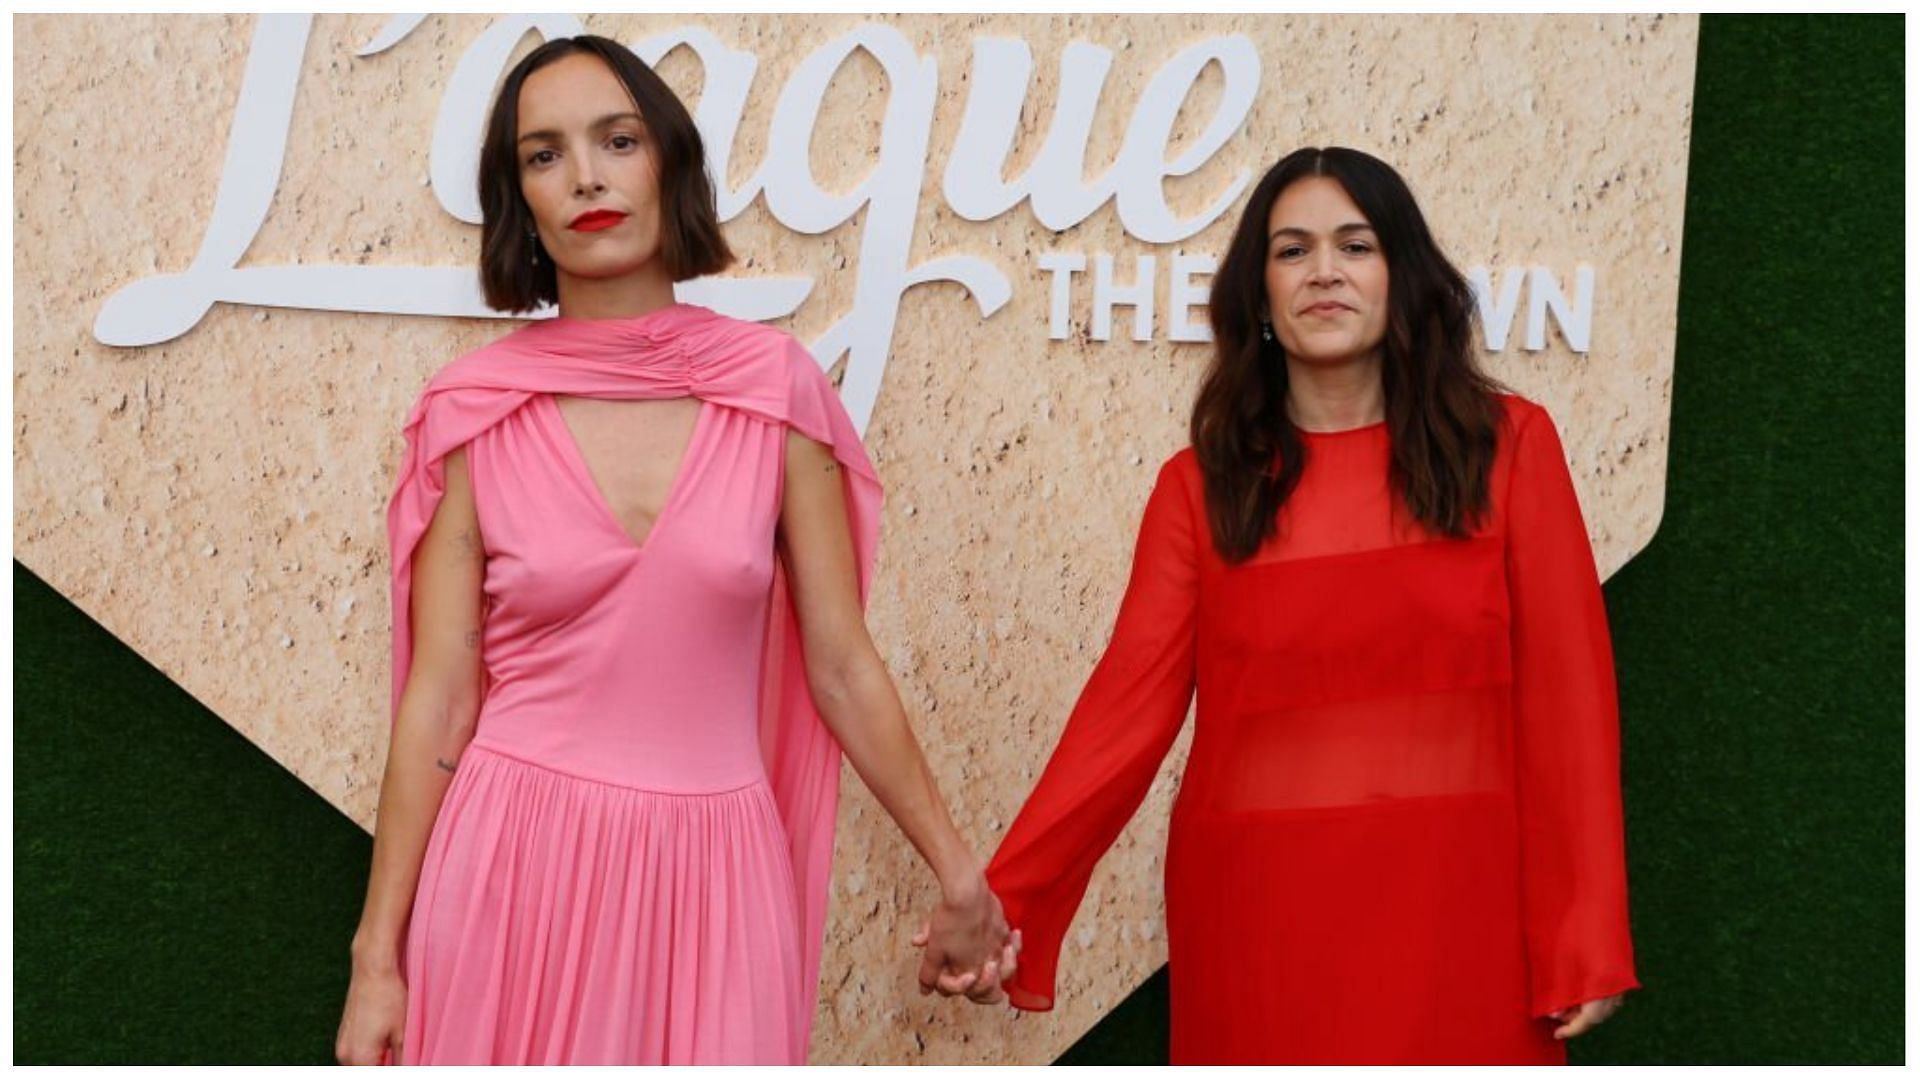 Abbi Jacobson and Jodi Balfour are now engaged (Image via Leon Bennett/Getty Images)